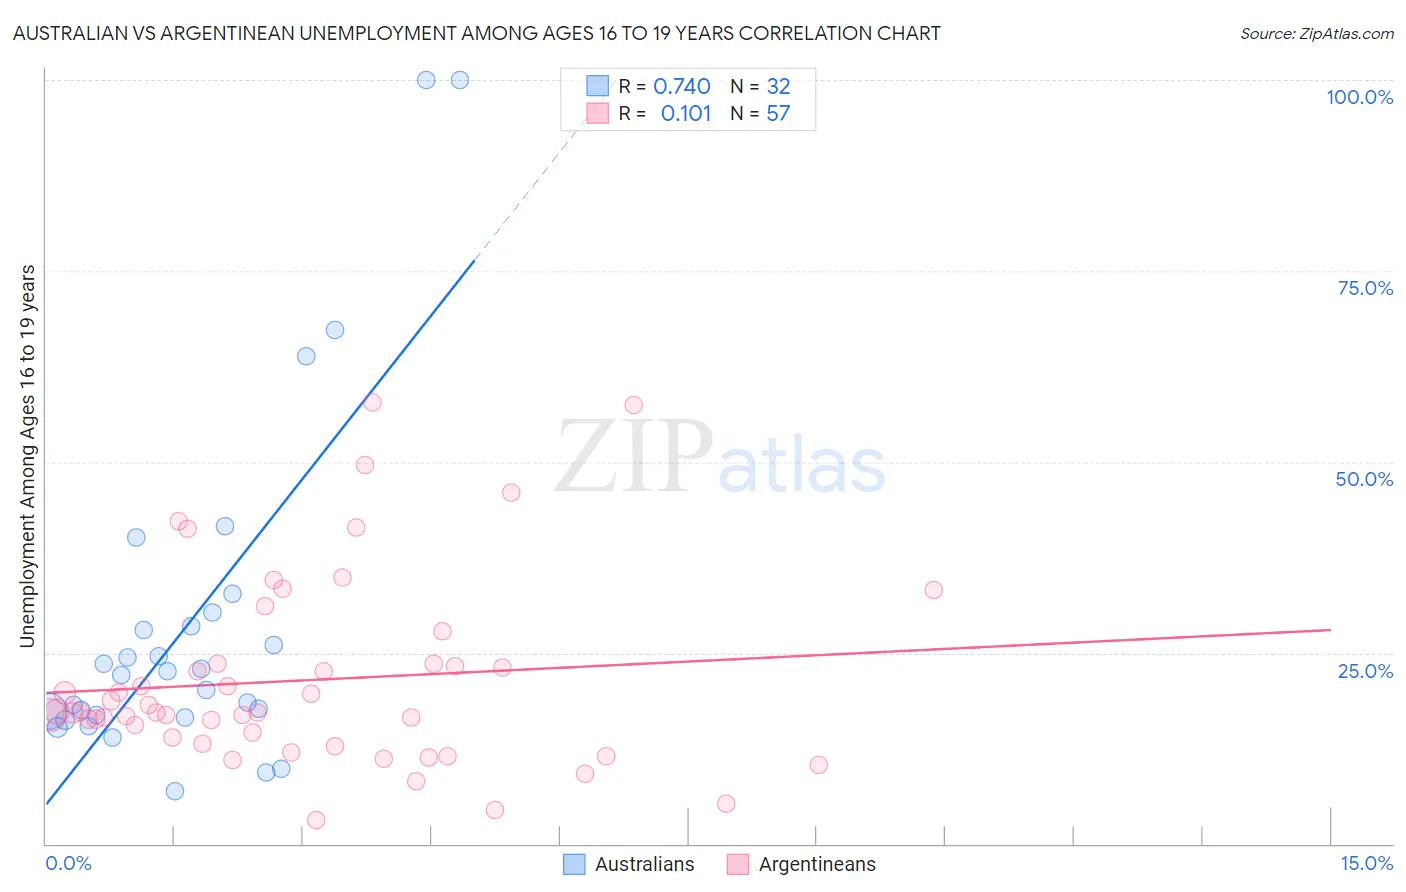 Australian vs Argentinean Unemployment Among Ages 16 to 19 years